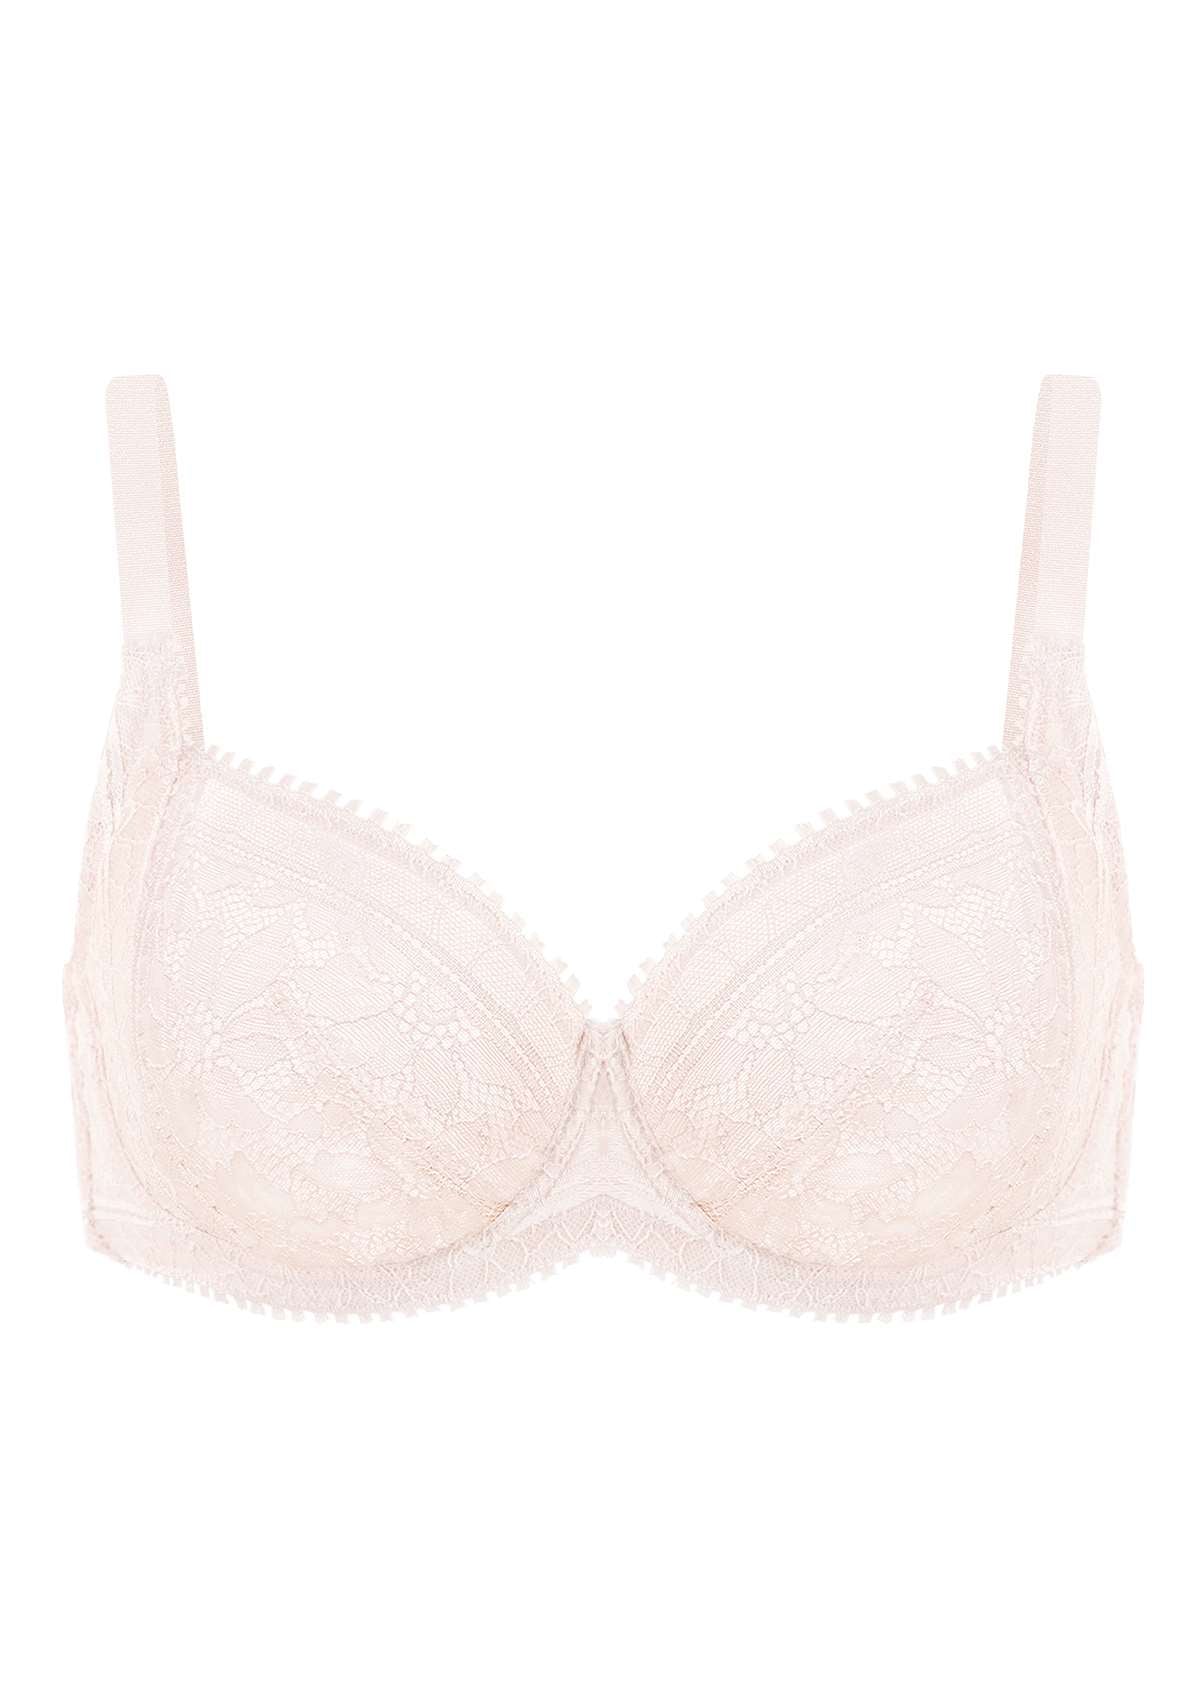 HSIA Silene Floral Delicate Unlined Lace Soft Cup Uplift Bra - Heavenly Pink / 38 / D